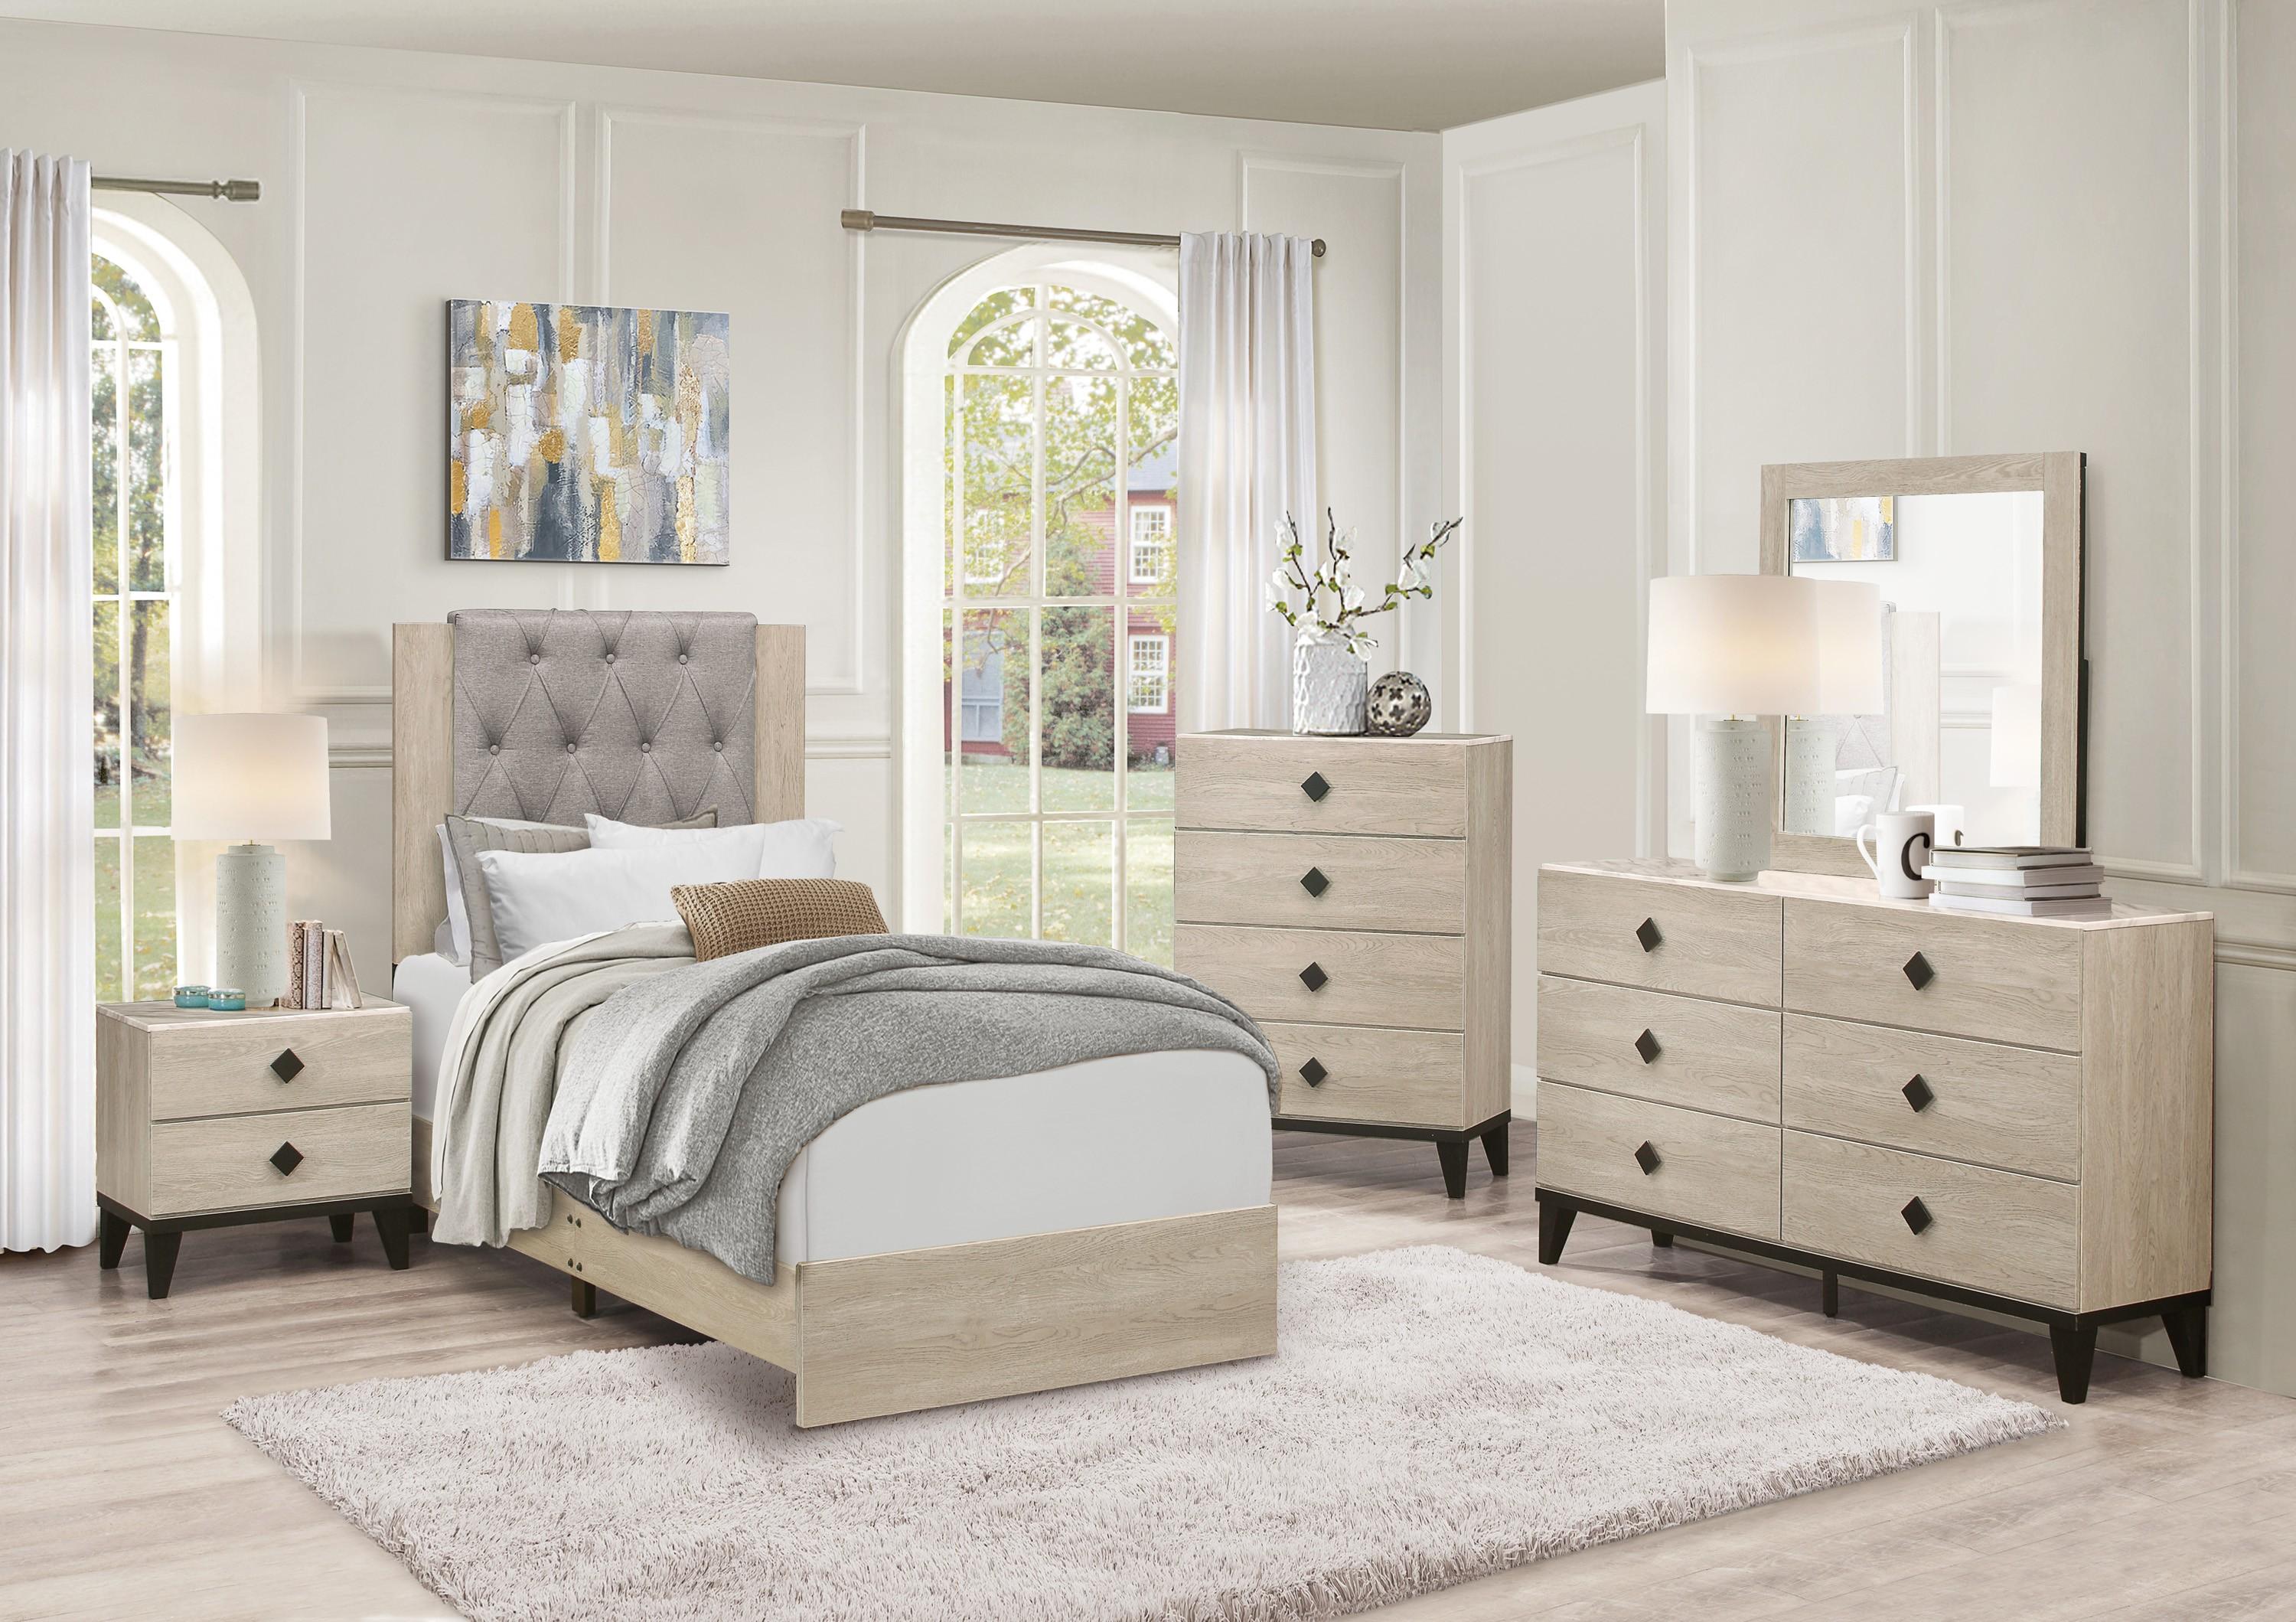 Modern Bedroom Set 1524T-1-5PC Whiting 1524T-1-5PC in Cream Polyester